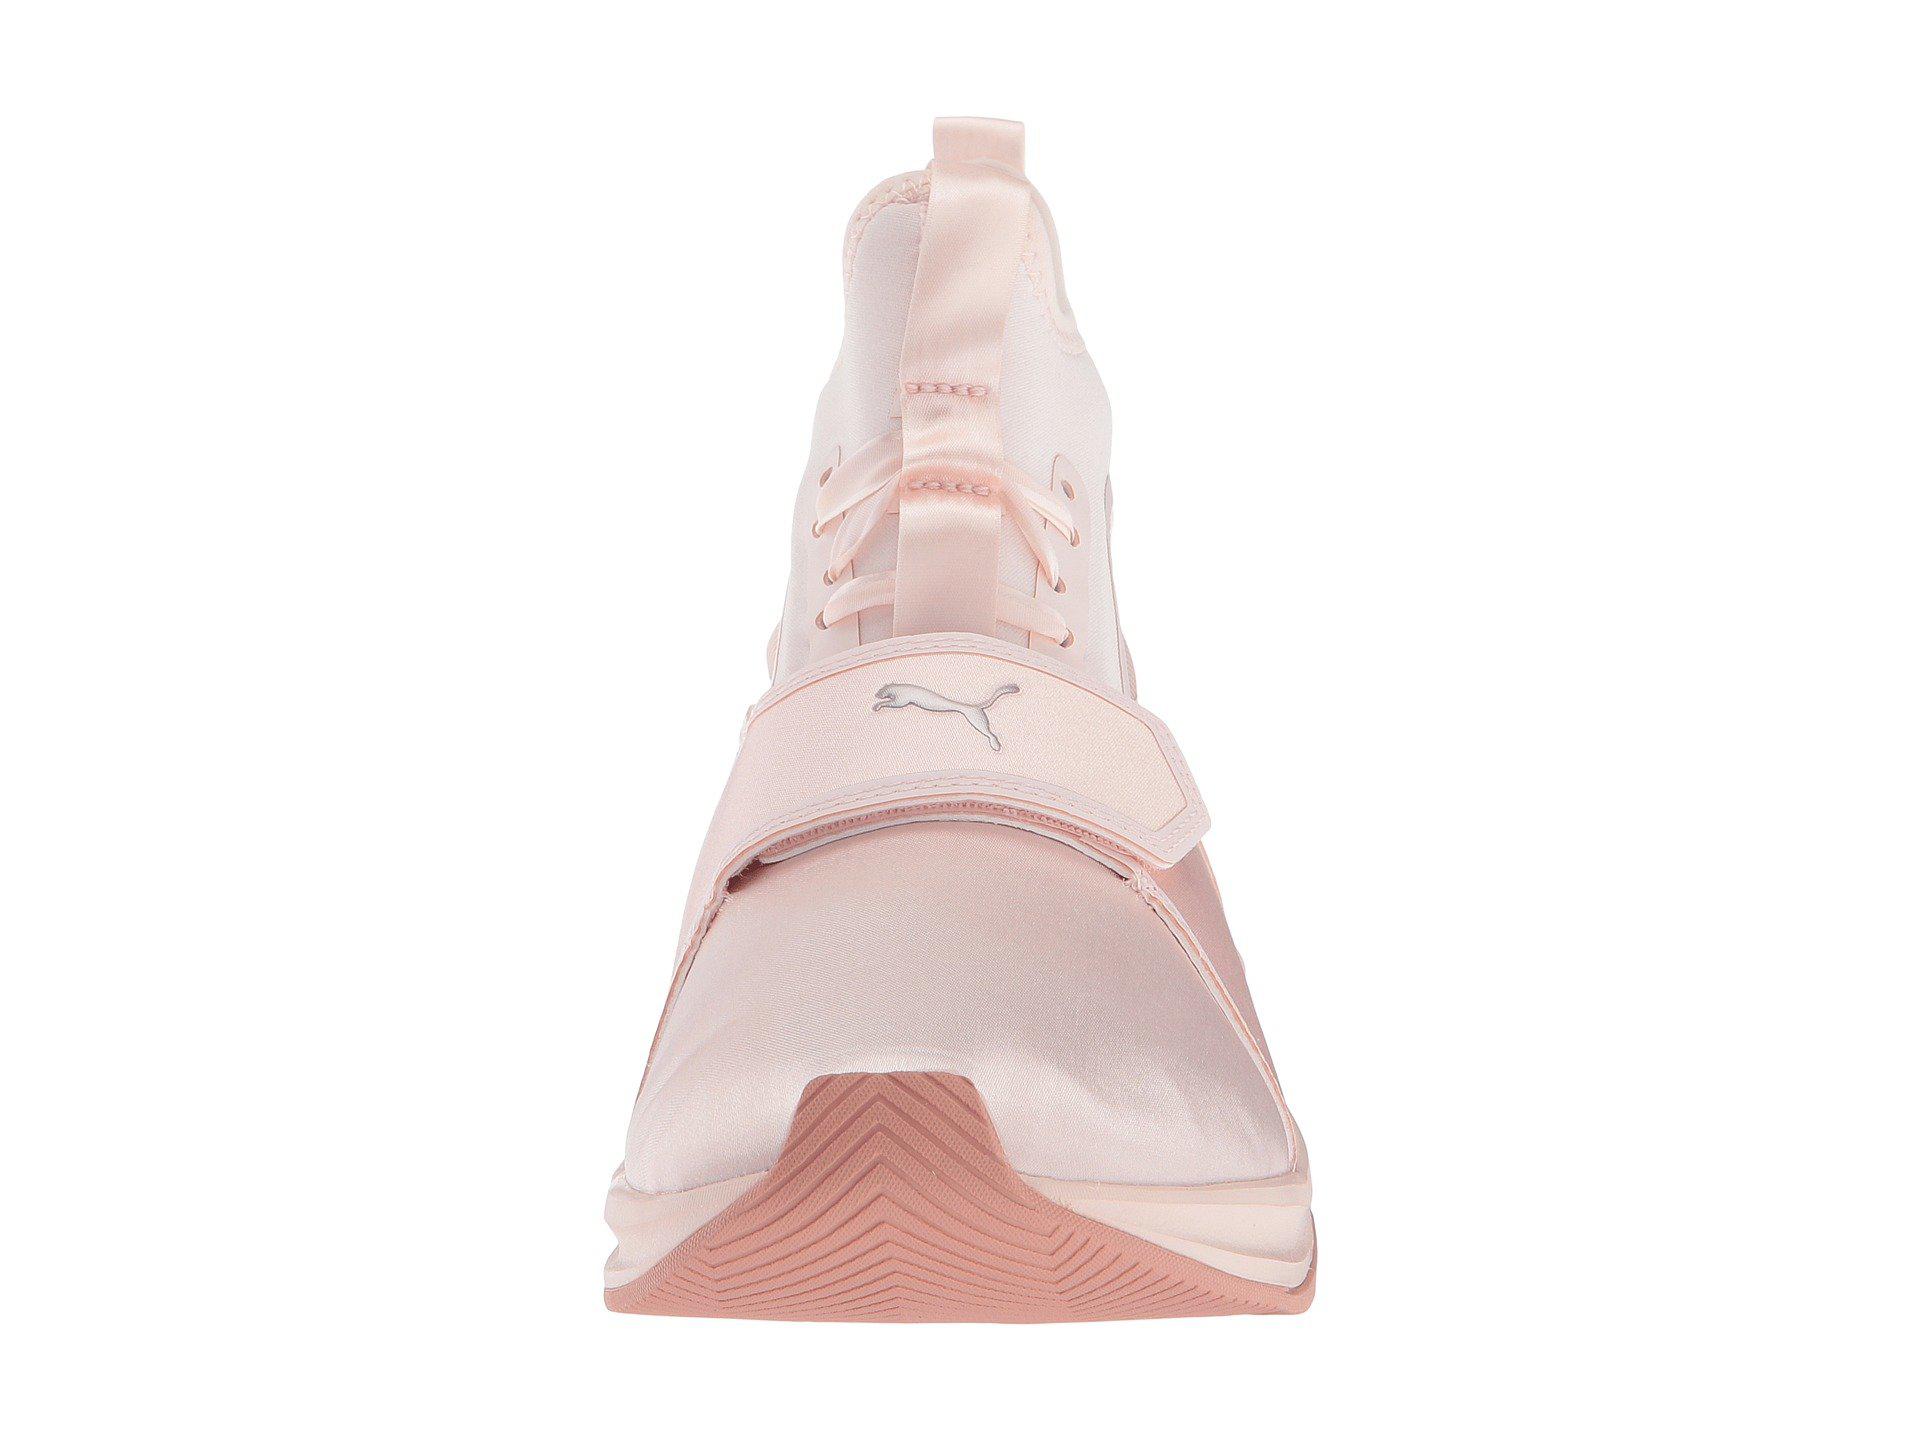 Prehistoric Center Strong wind PUMA Phenom Satin Ep (pearl/pearl) Women's Shoes in Pink | Lyst